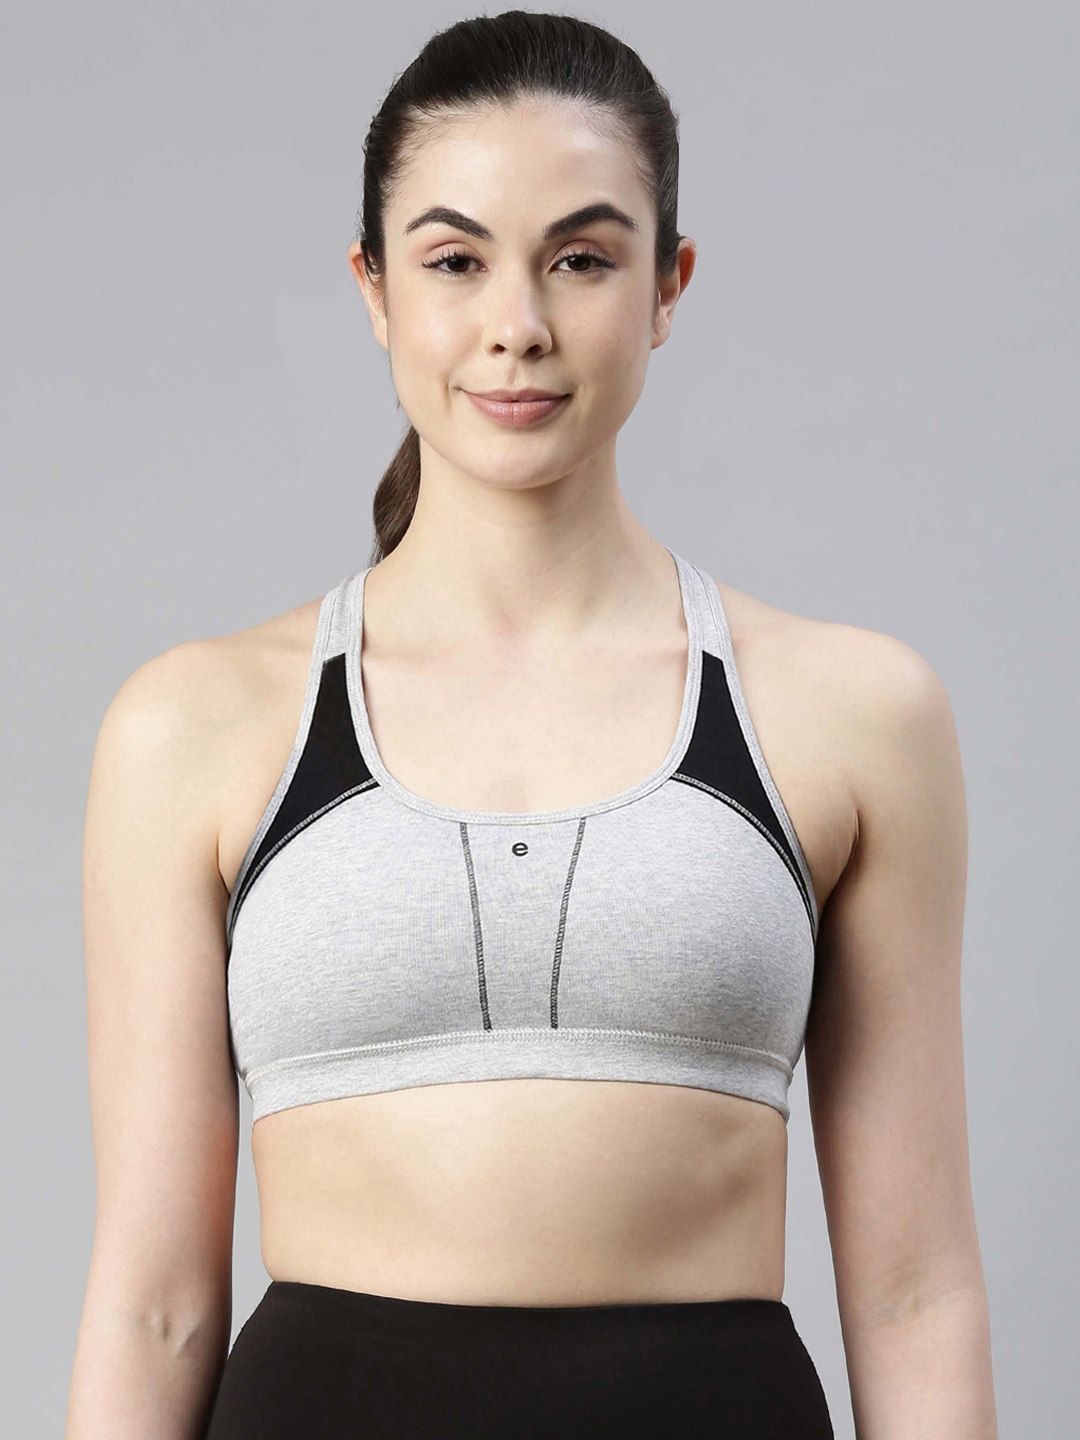 Jockey Sporties Breathable Removable Cup Crop Top Mesh Sports Bra Size  Small